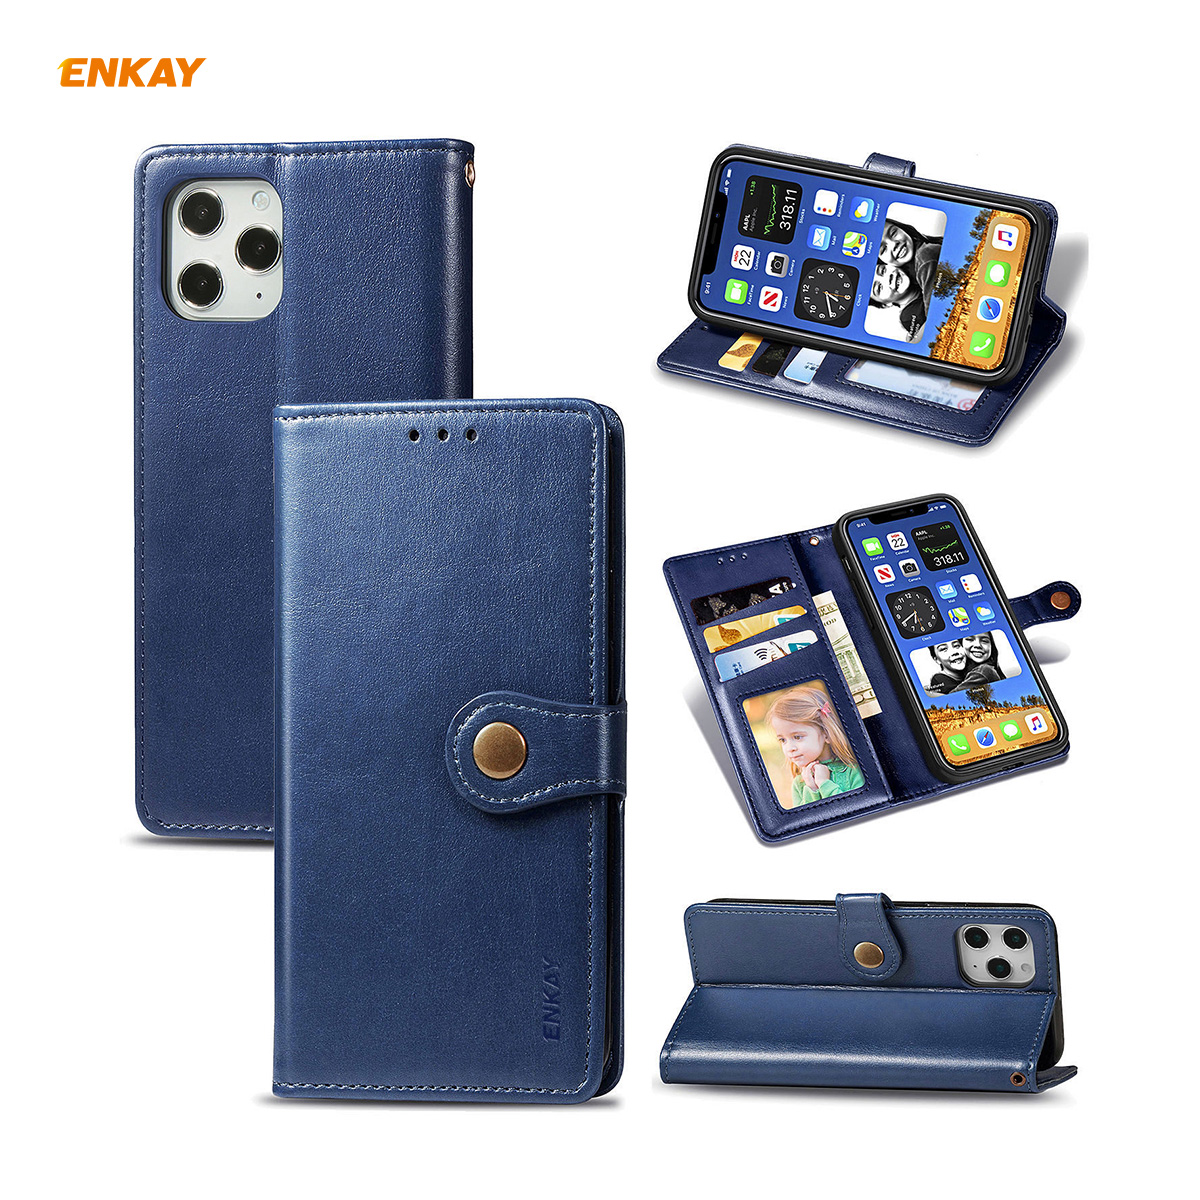 Enkay-for-iPhone-12-Pro-Max-Case-Retro-Litchi-Pattern-Flip-with-Mutiple-Card-Slots-Wallet-Stand-PU-L-1755116-1